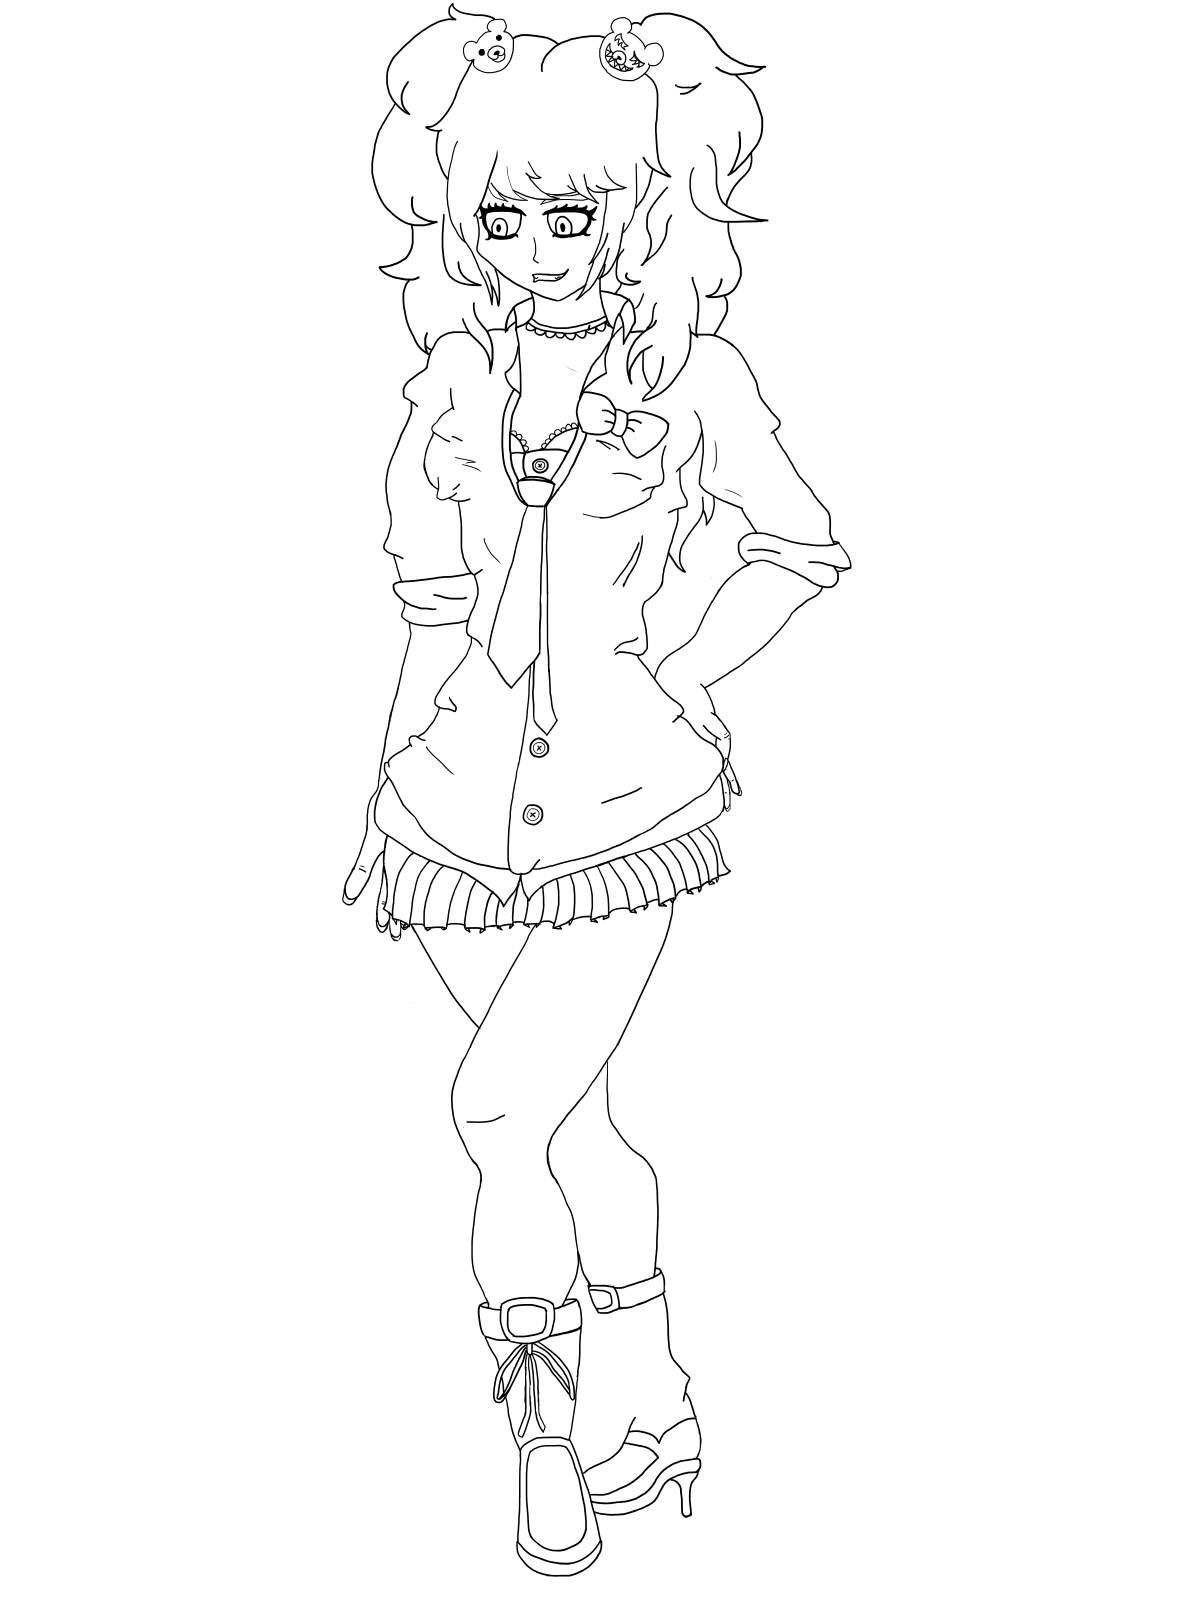 Junko_1_wip_2.png